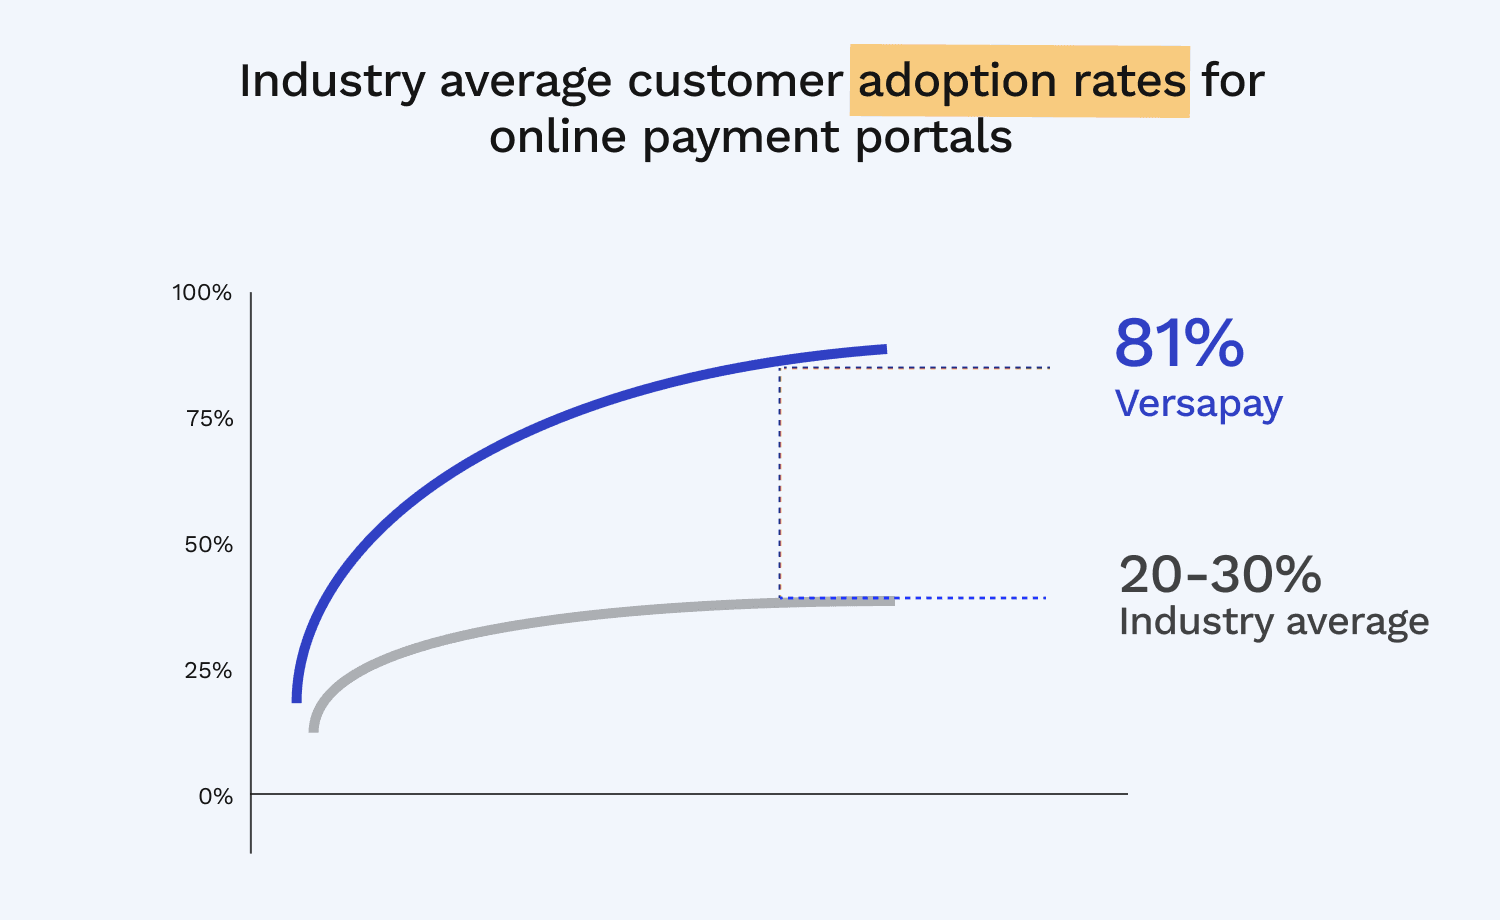 Industry average customer adoption rates for online payment portals